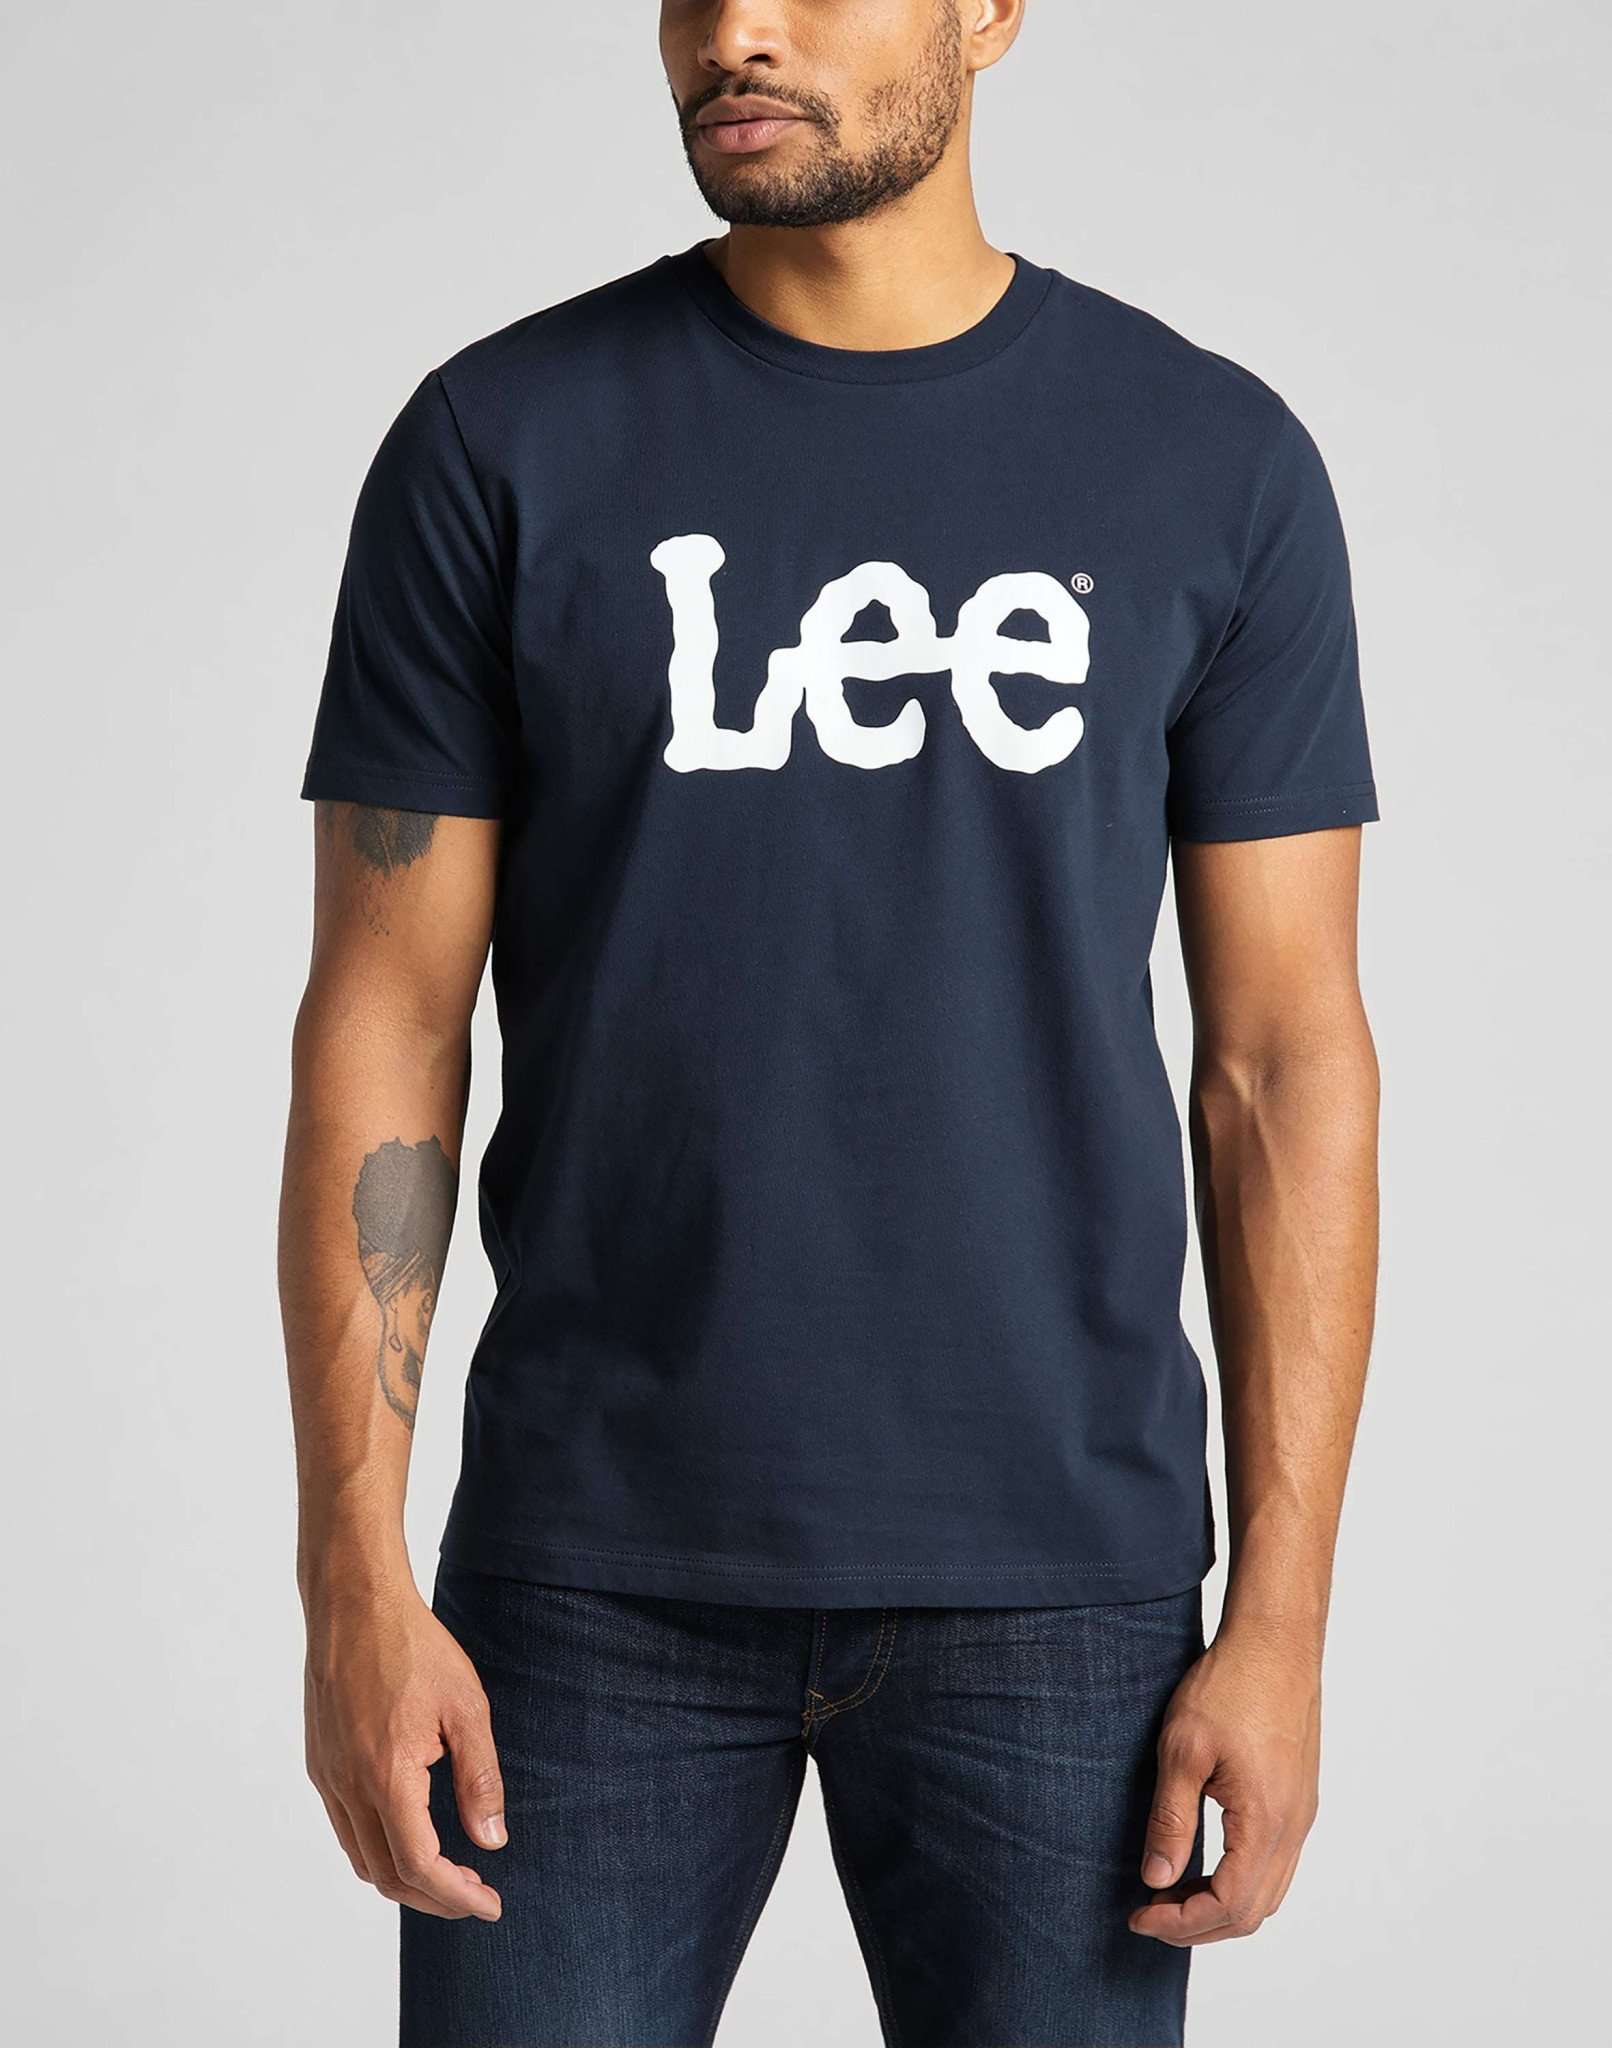 Wobbly Logo Tee in Navy T-Shirts Lee   